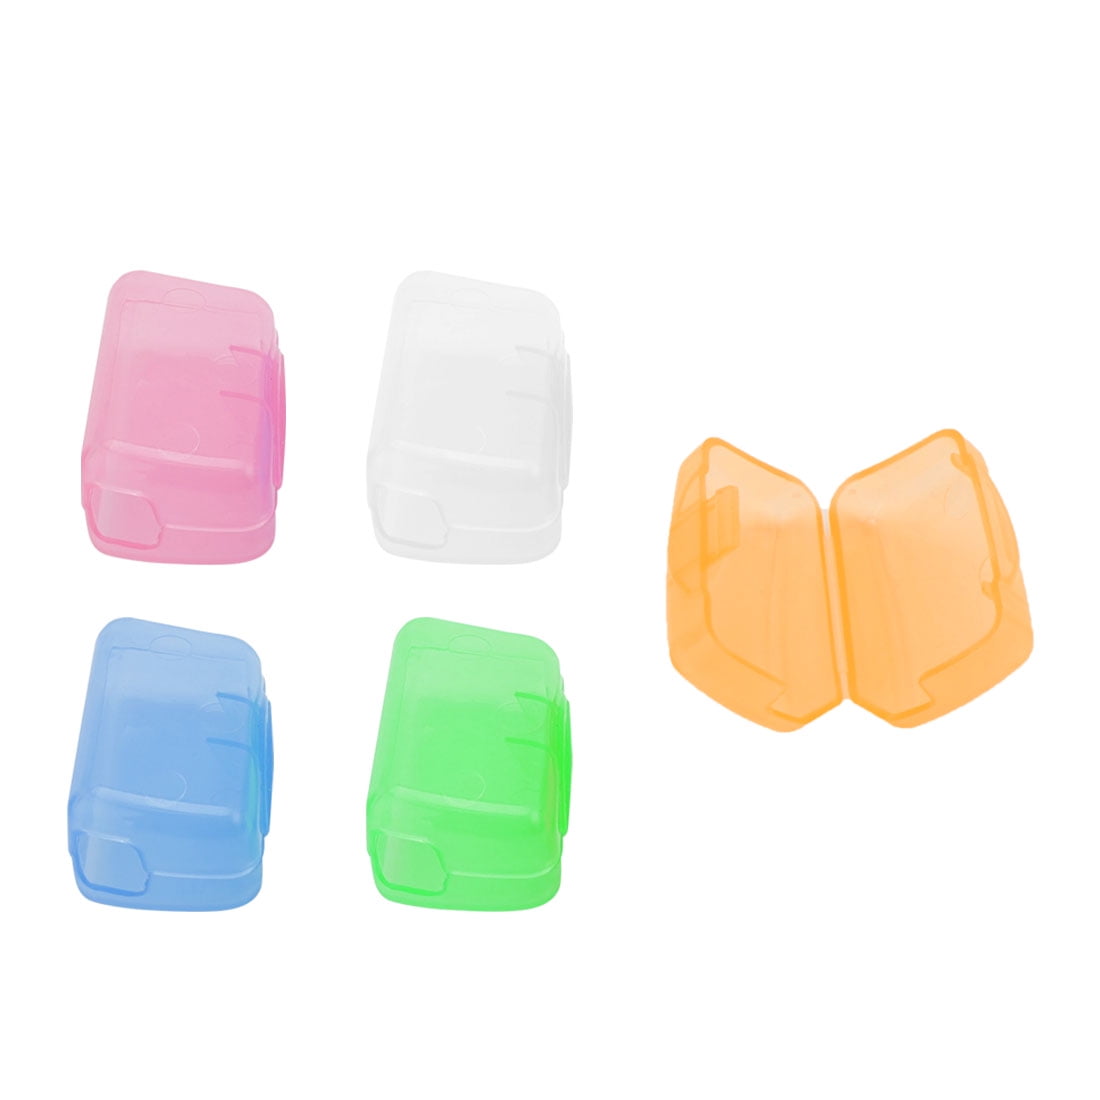 1set/5x New Portable Travel Toothbrush Head Cover Case Protective Caps Nice CA 